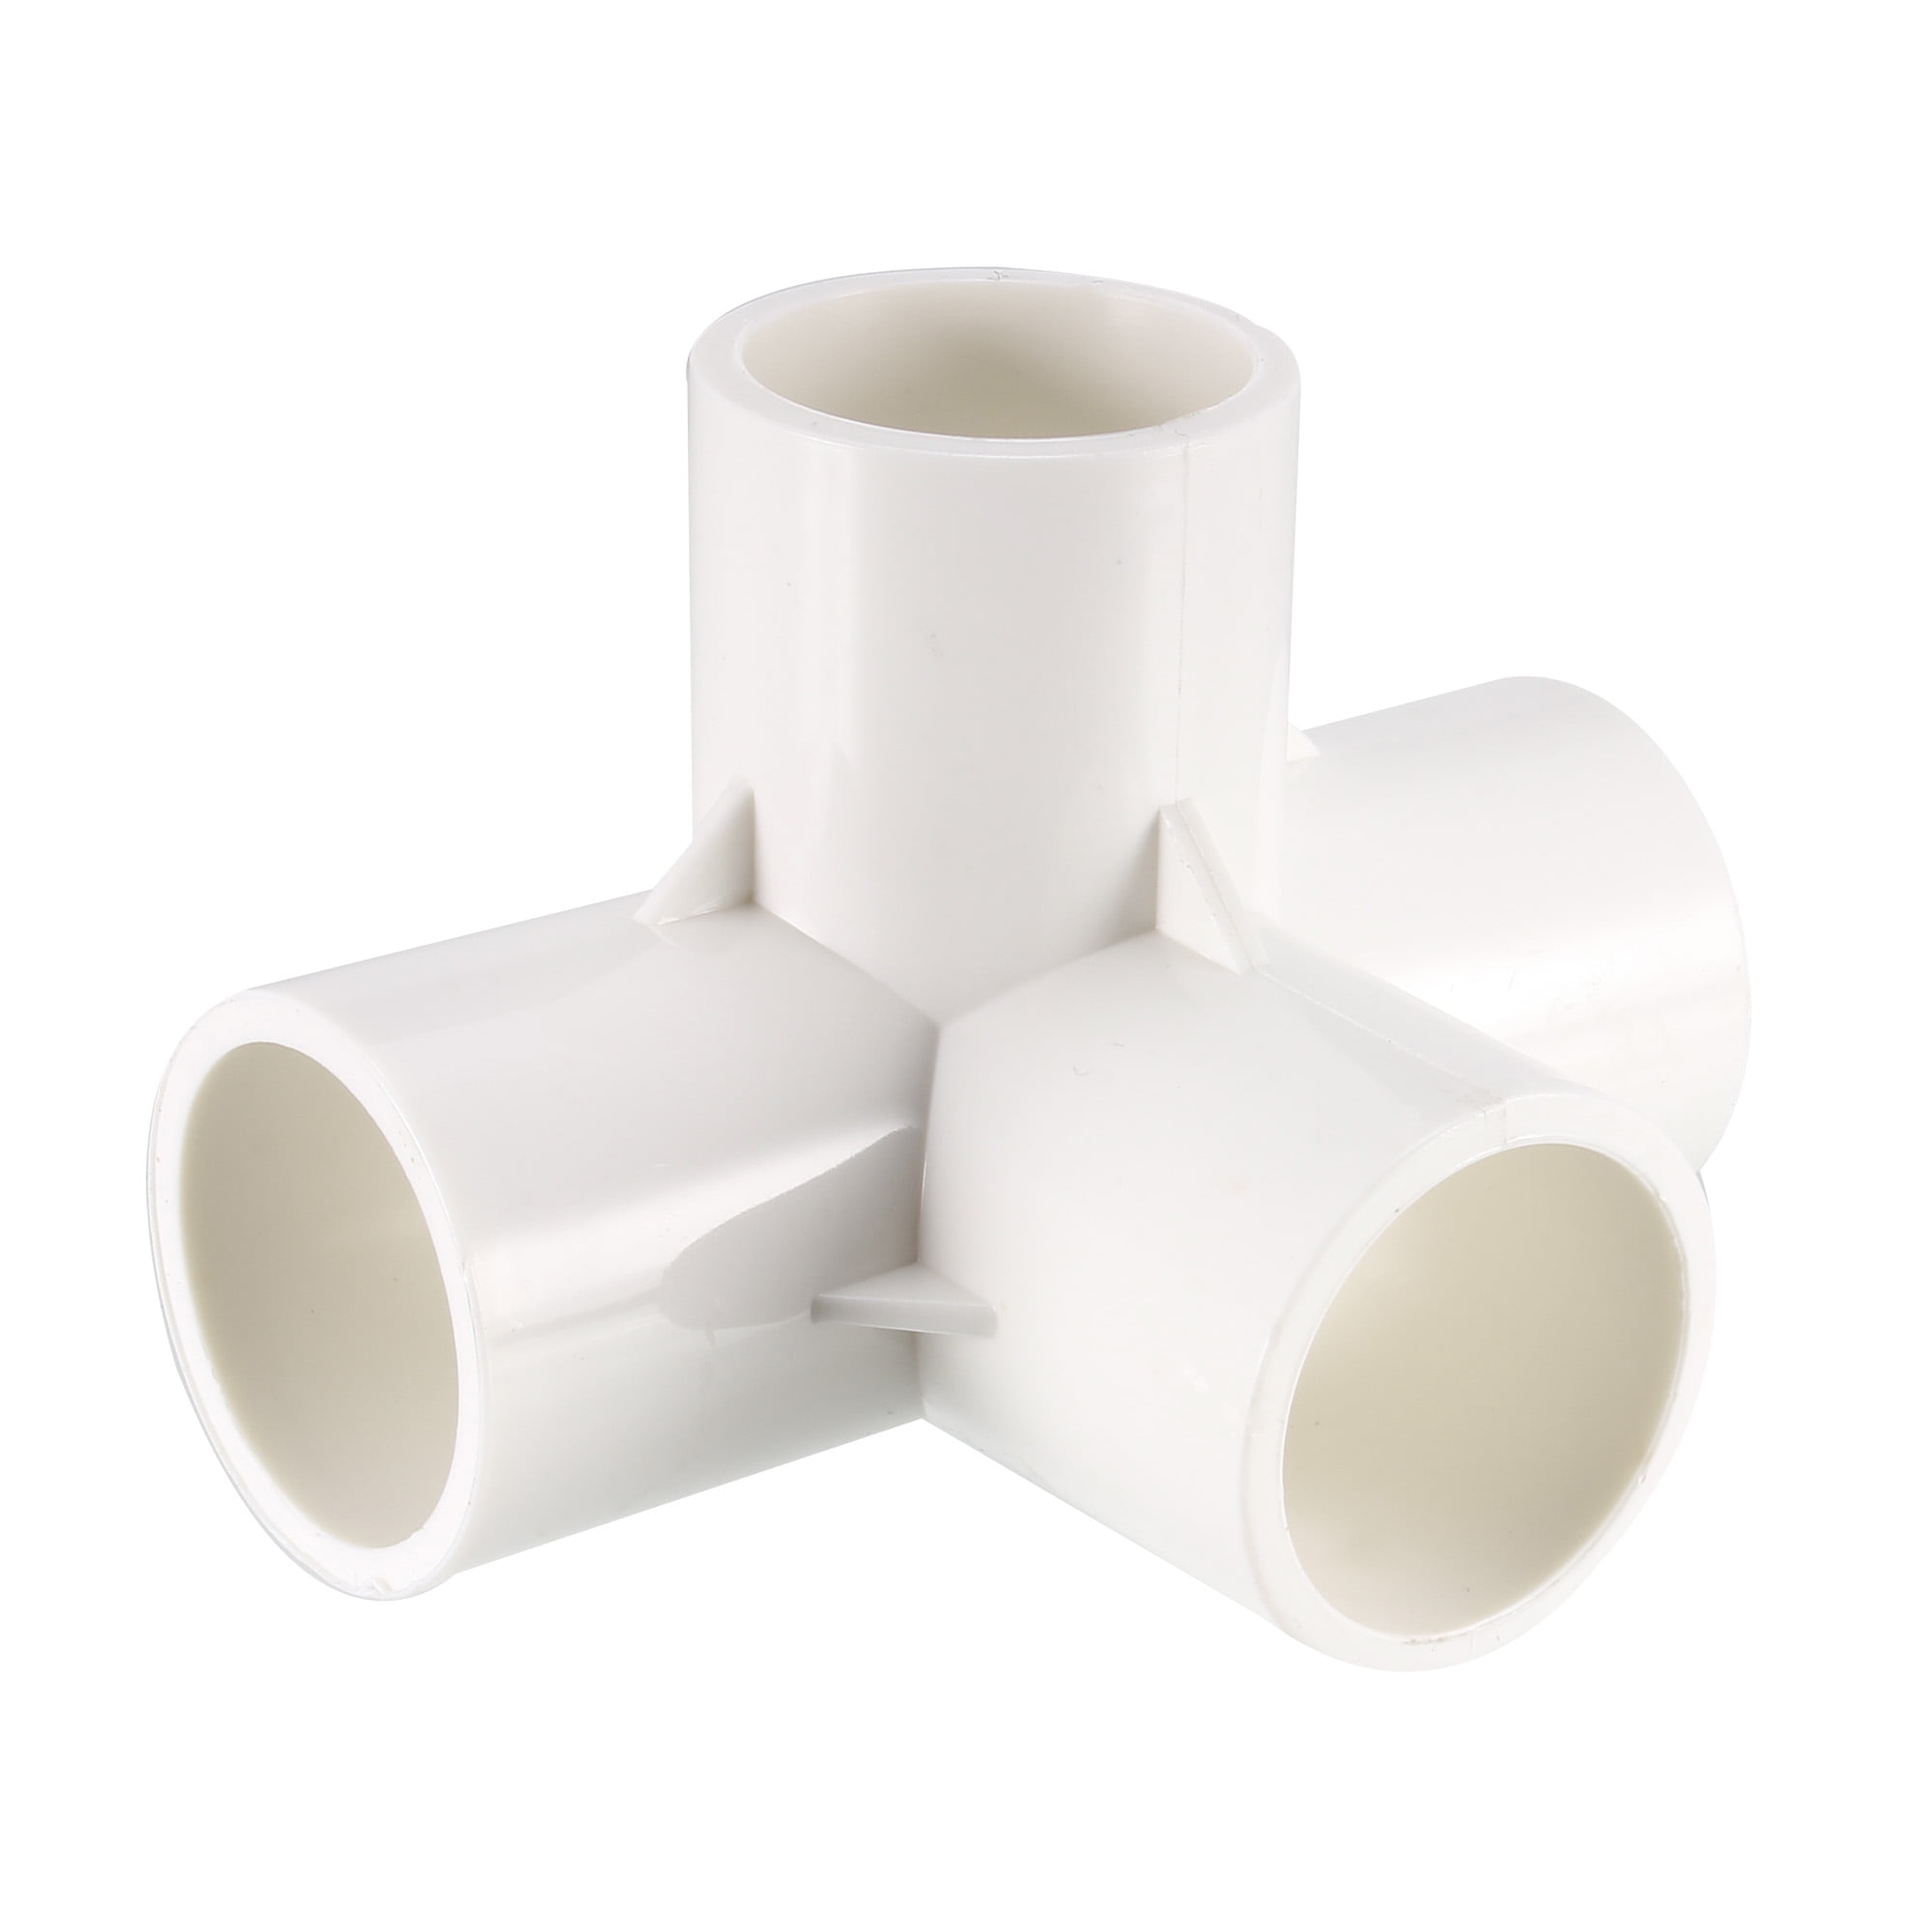 12 Pack KP Kool Products 3/4 inch Elbow Connector For 3/4 PVC Pipe I Plastic Tube I Plastic Pipe Fitting I Plastic Water Fitting 